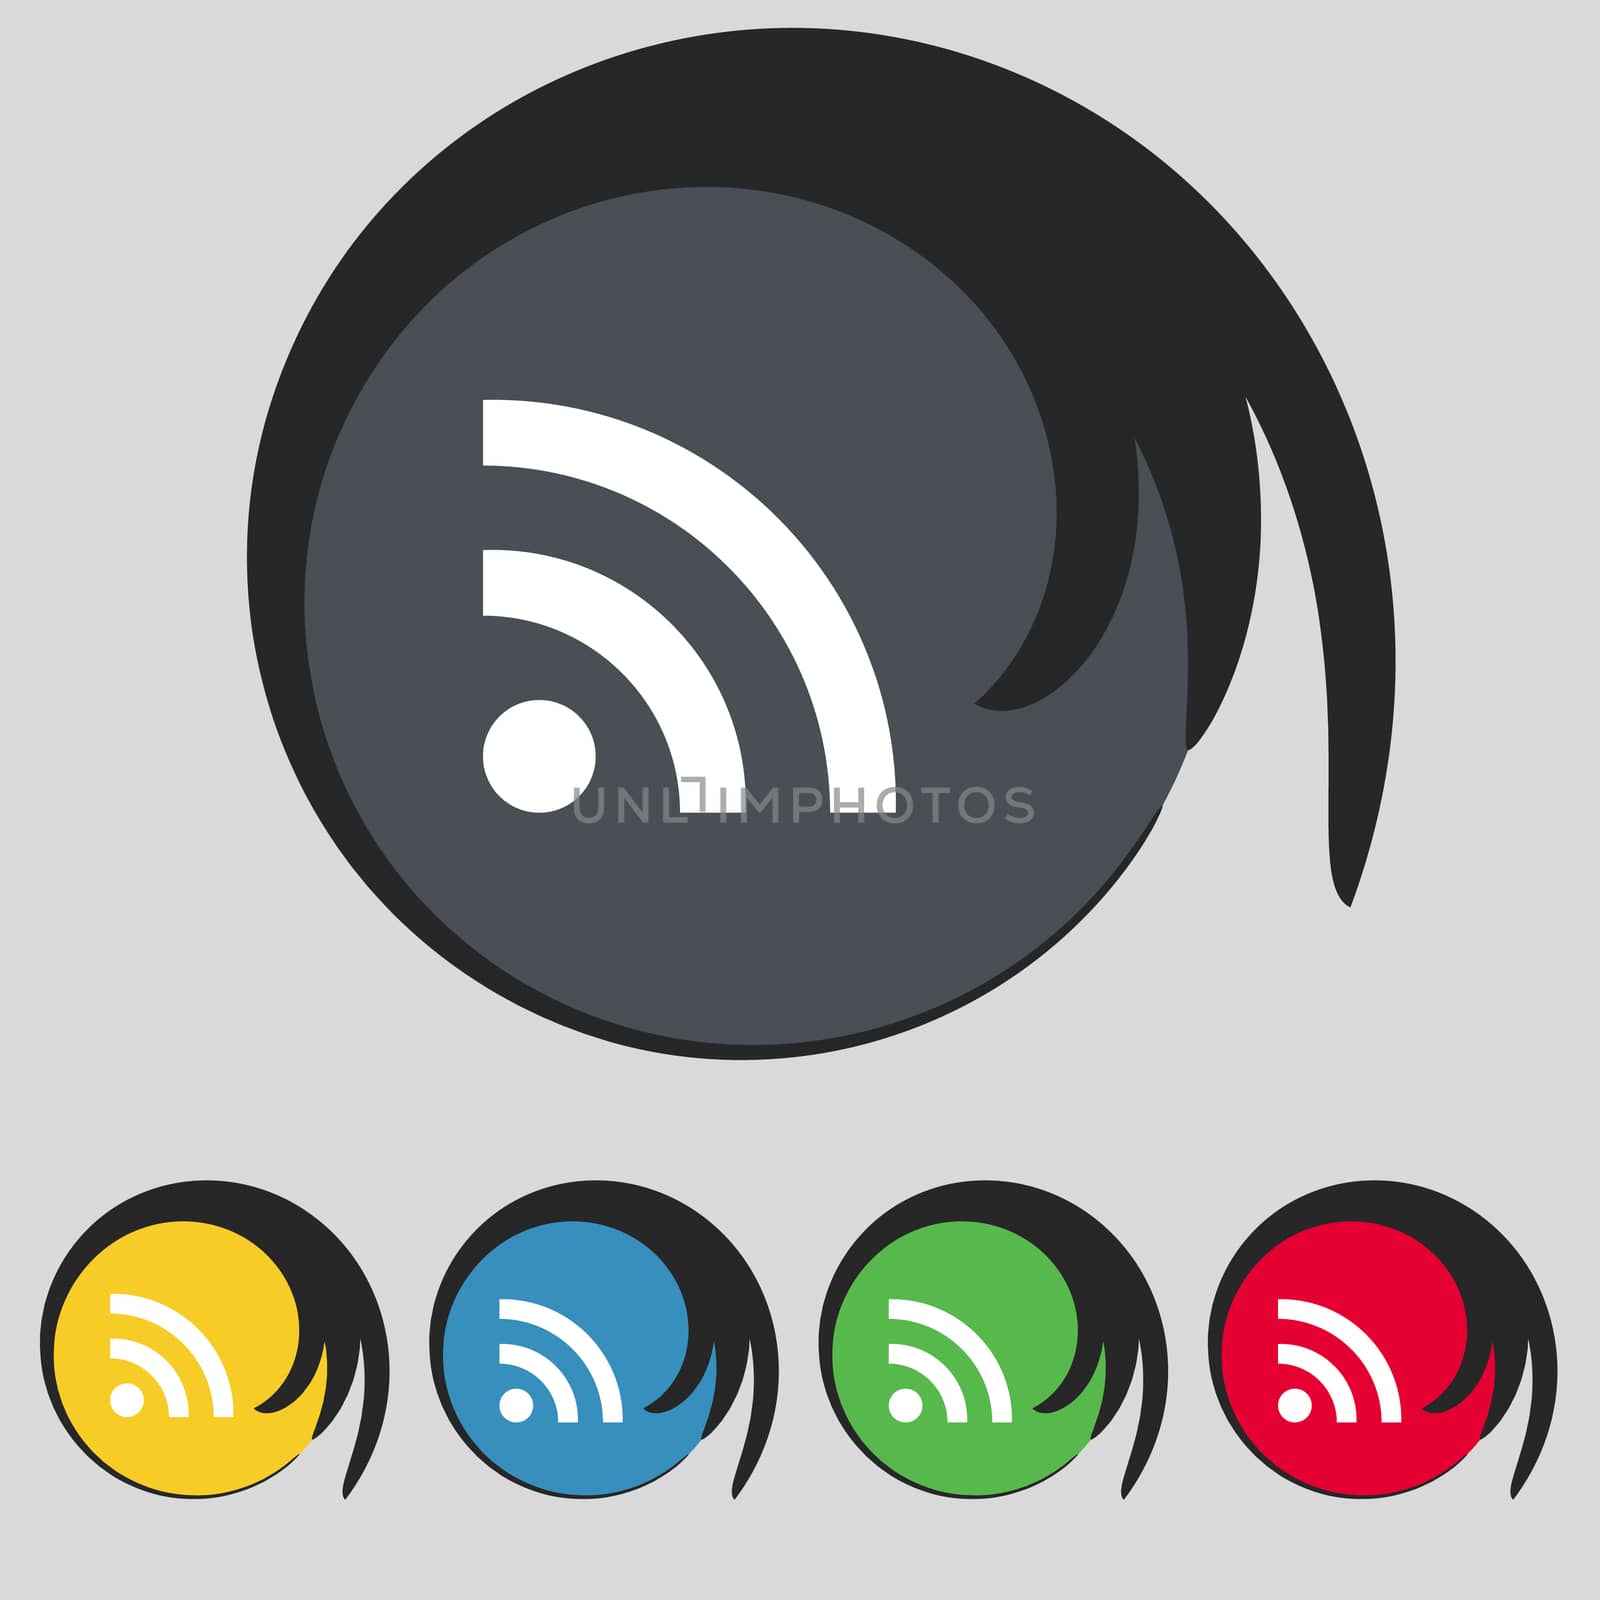 Wifi, Wi-fi, Wireless Network icon sign. Symbol on five colored buttons. illustration